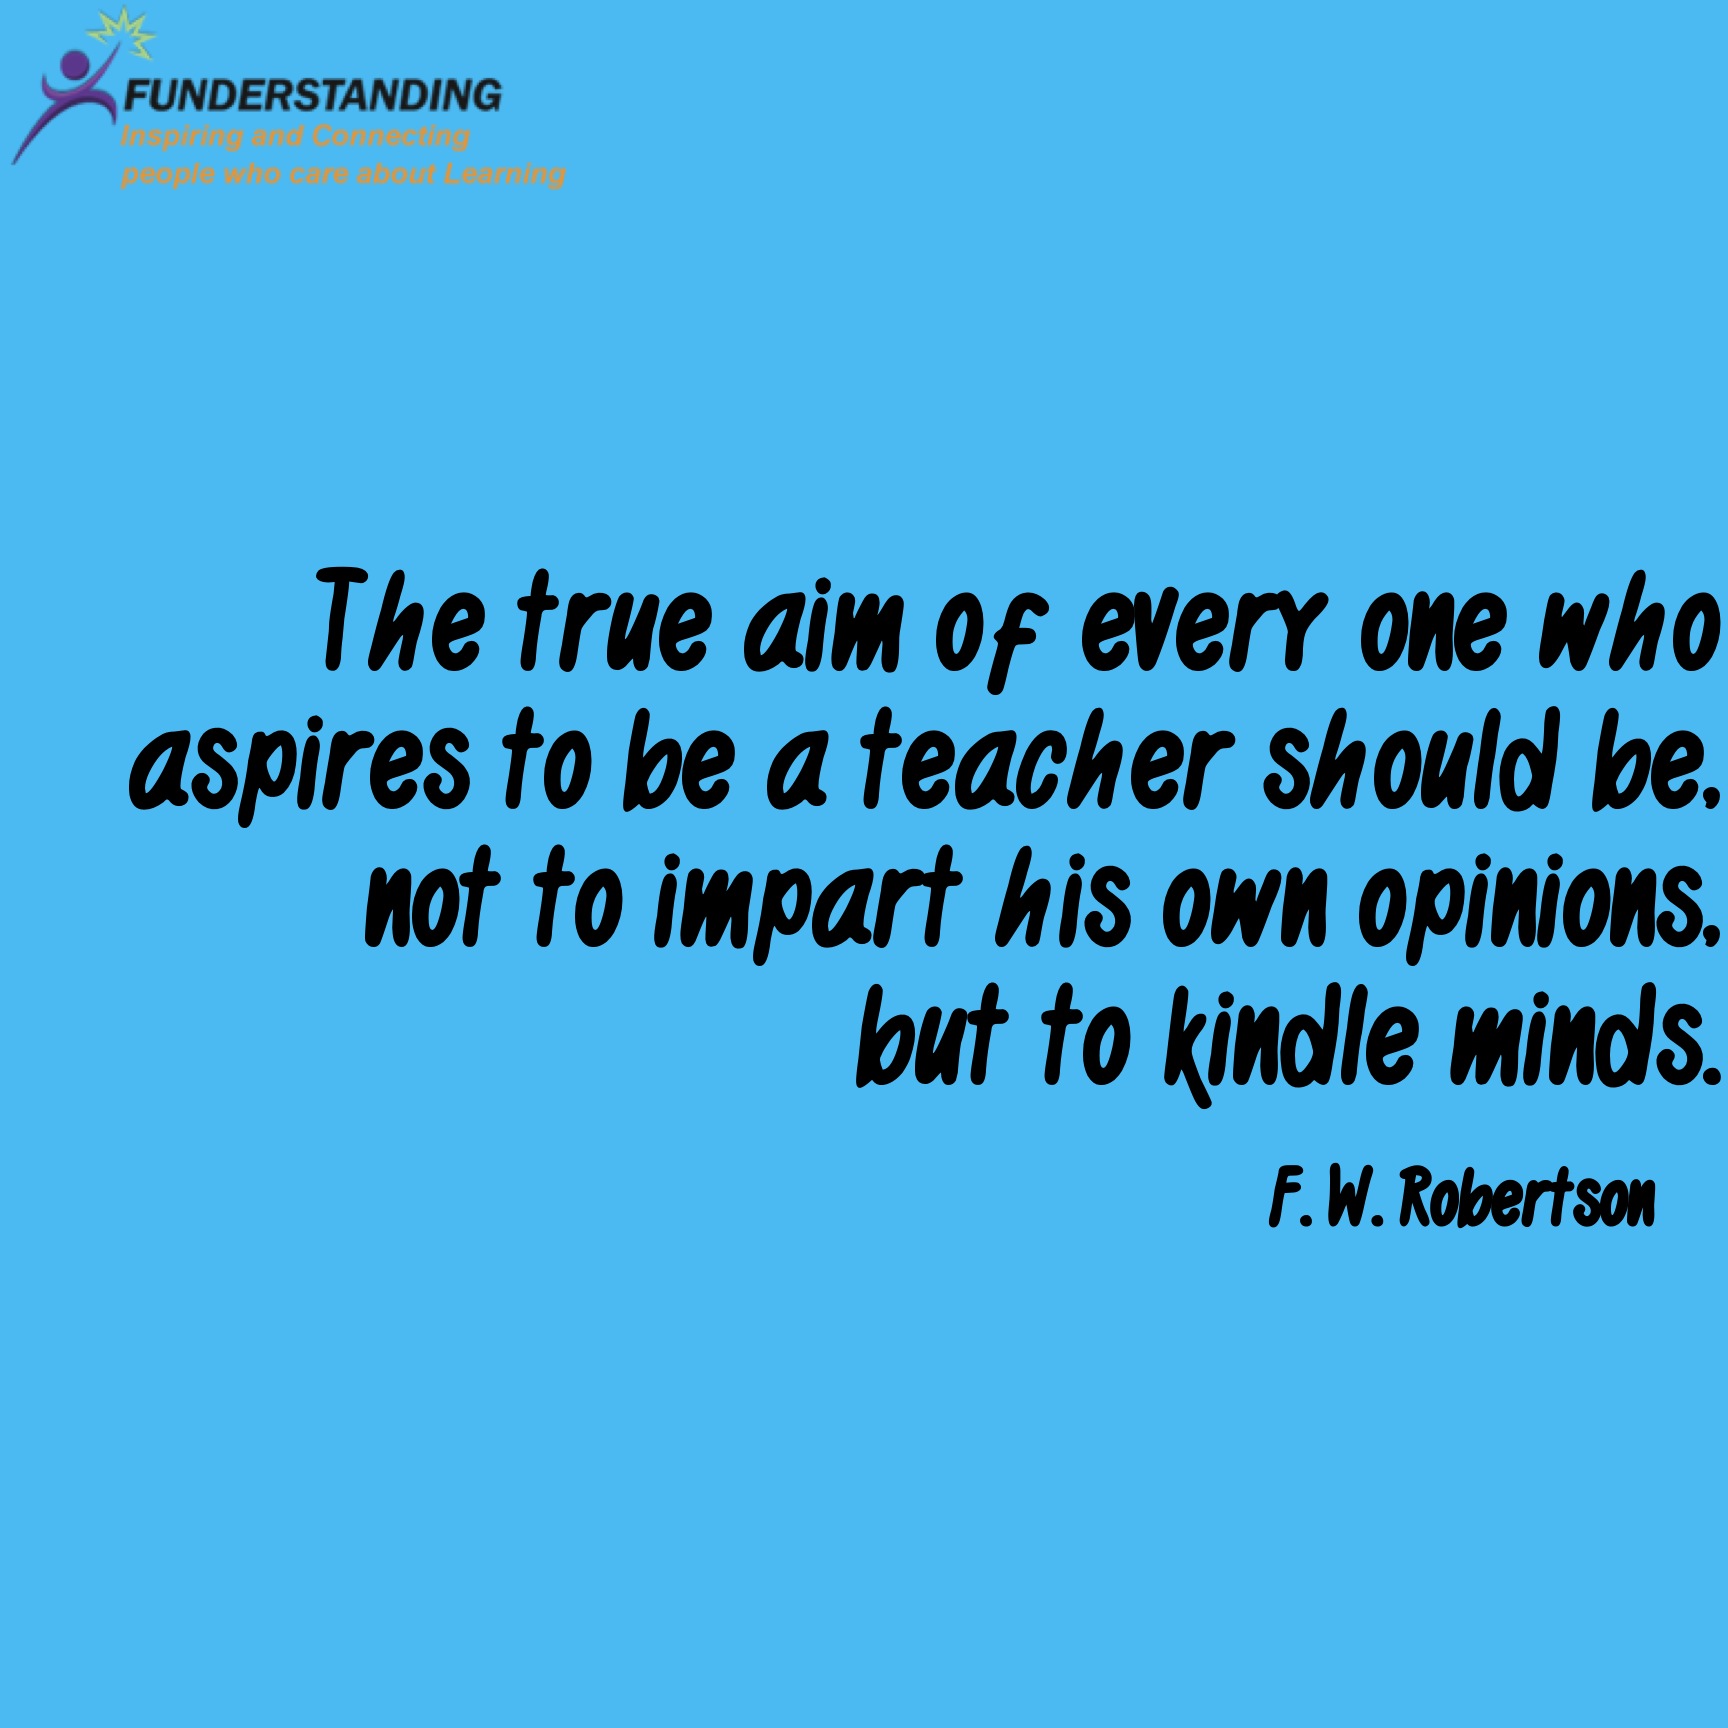 The true aim of everyone who aspires to be a teacher should be, not to impart his own opinions, but to kindle minds. Frederick William Robertson